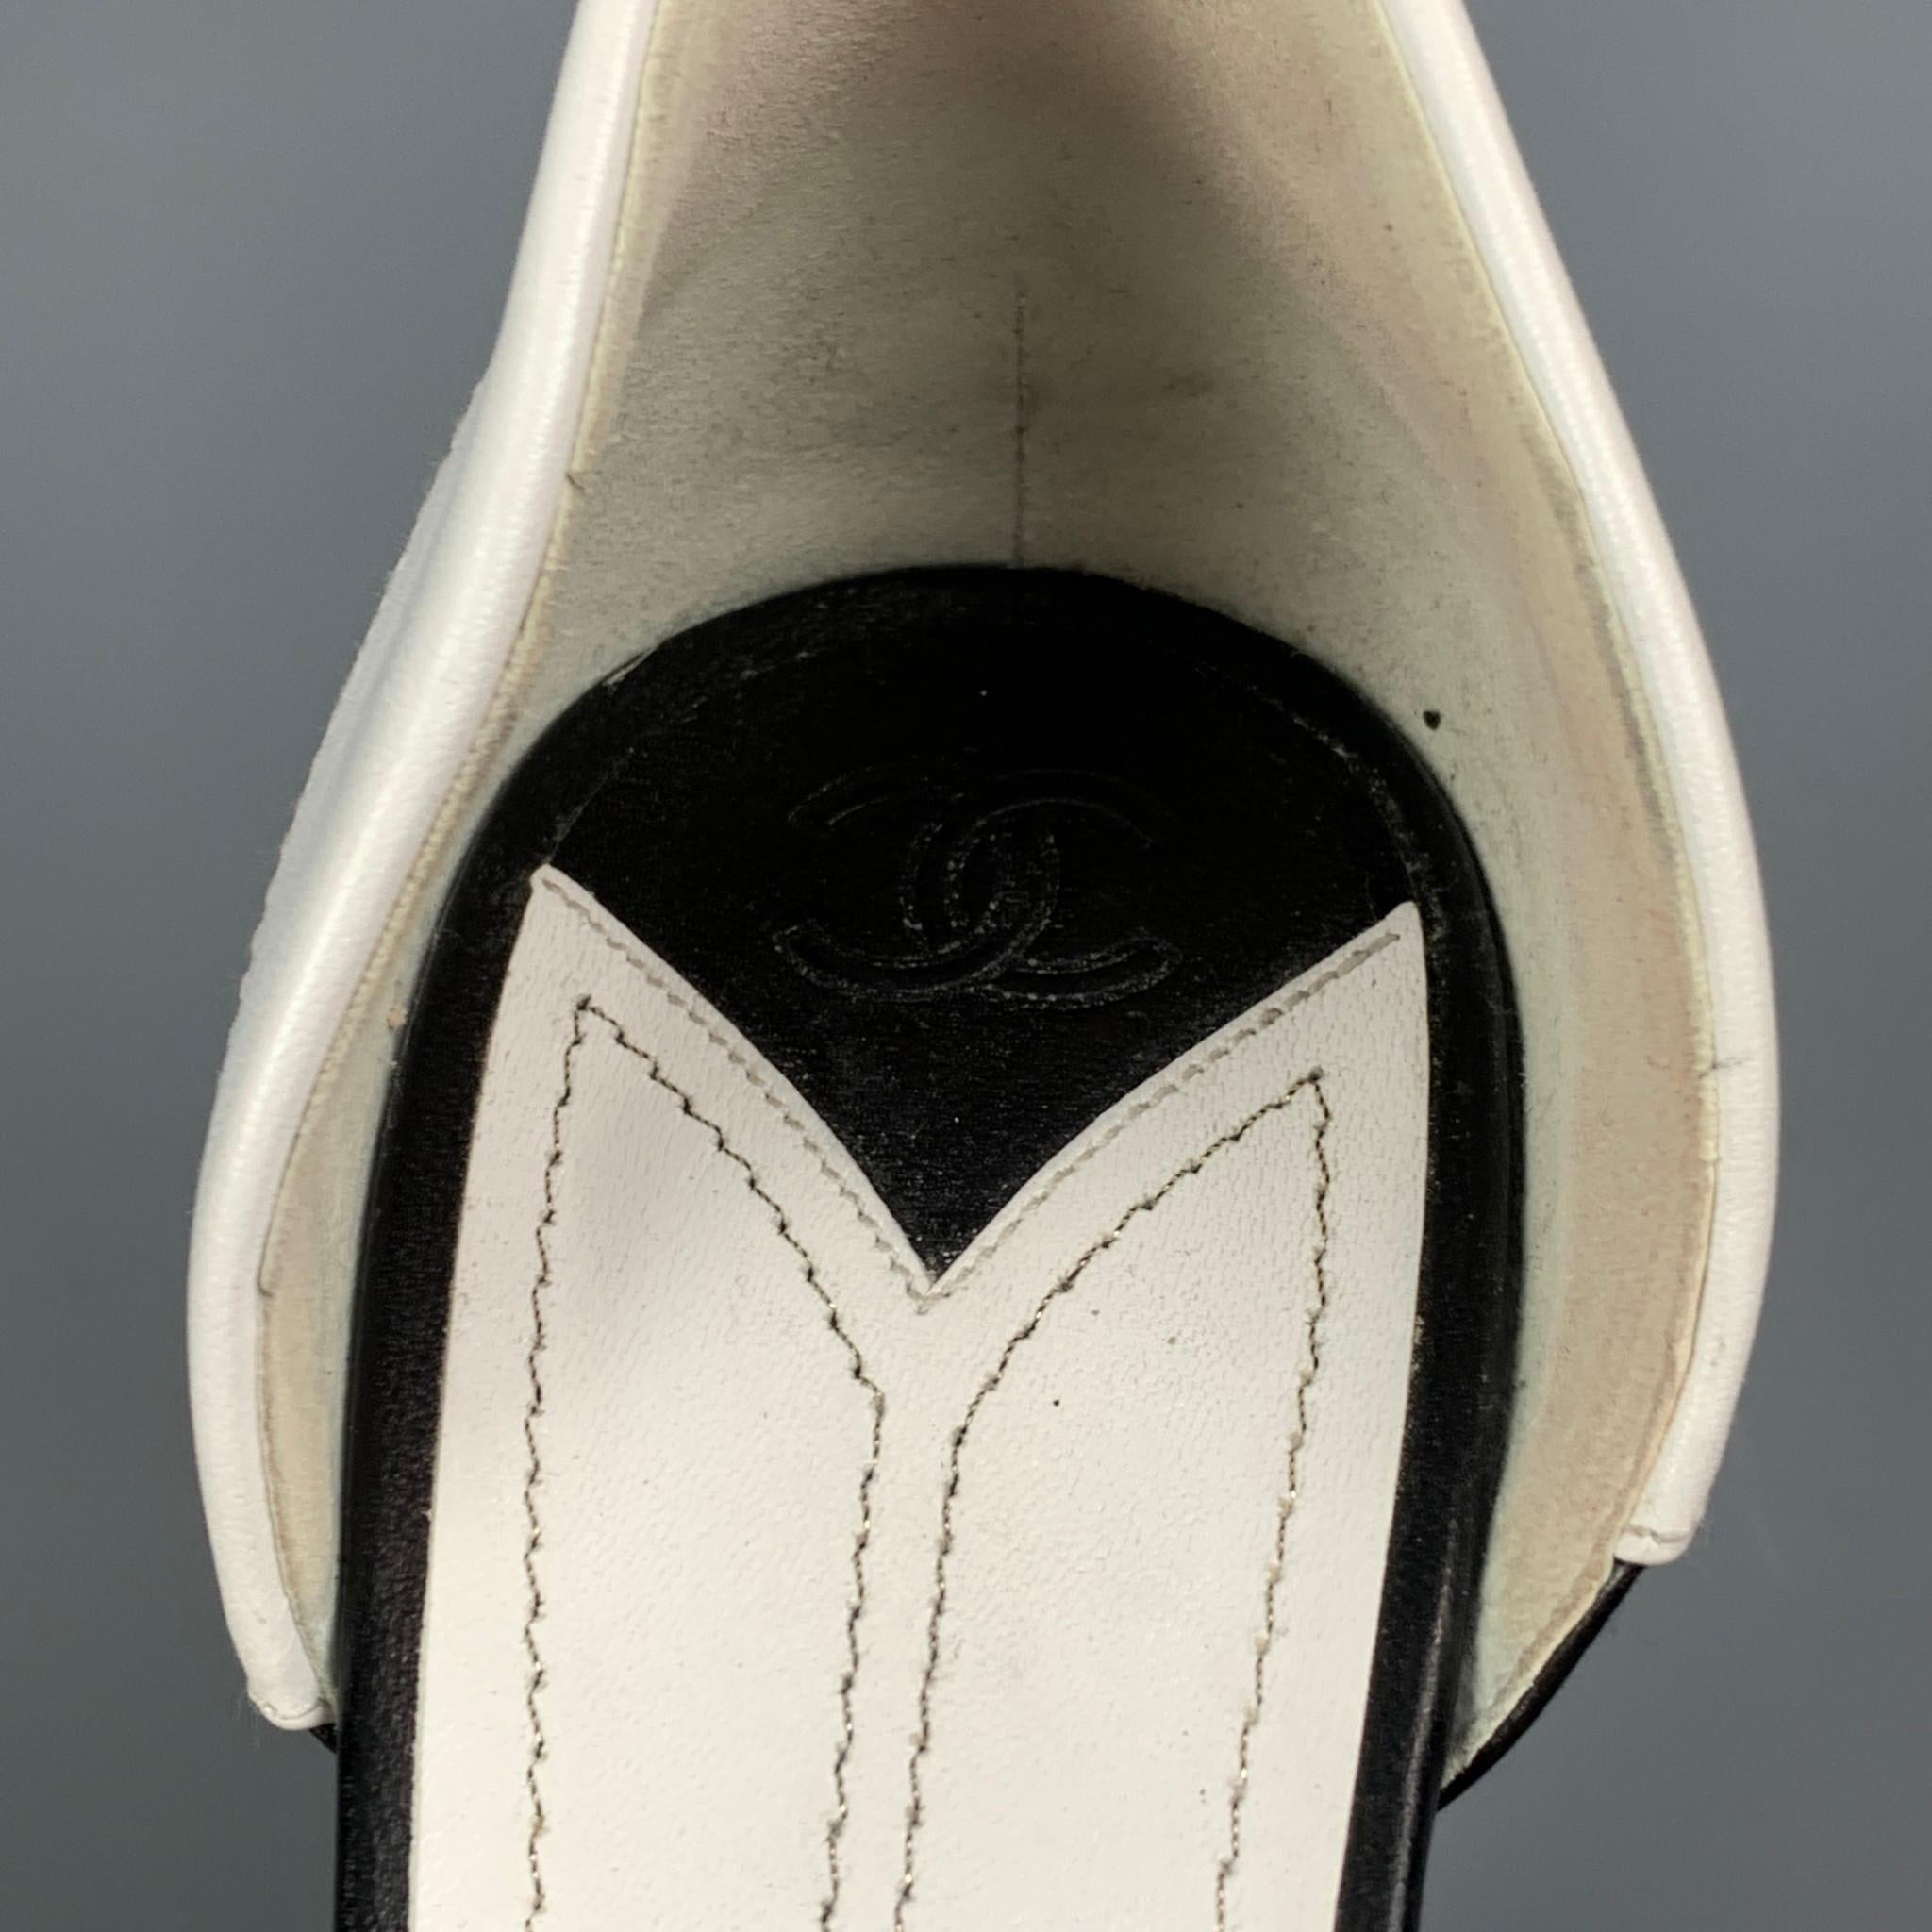 Beige CHANEL Size 10 White & Black Two Tone Leather D'Orsay Pumps